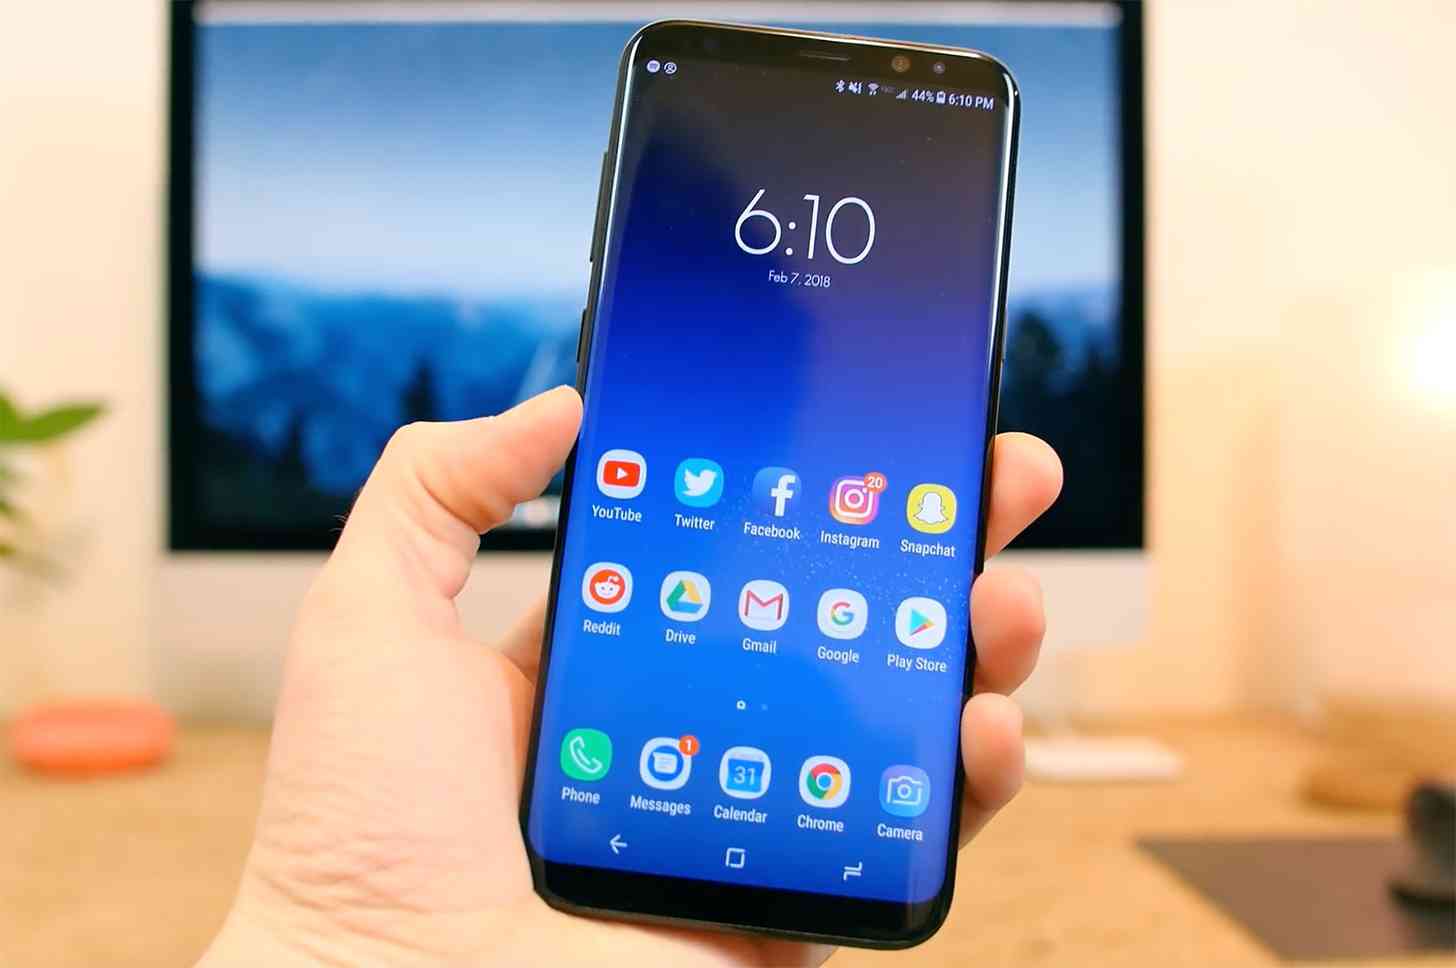 Samsung Galaxy S8 home screen hands on